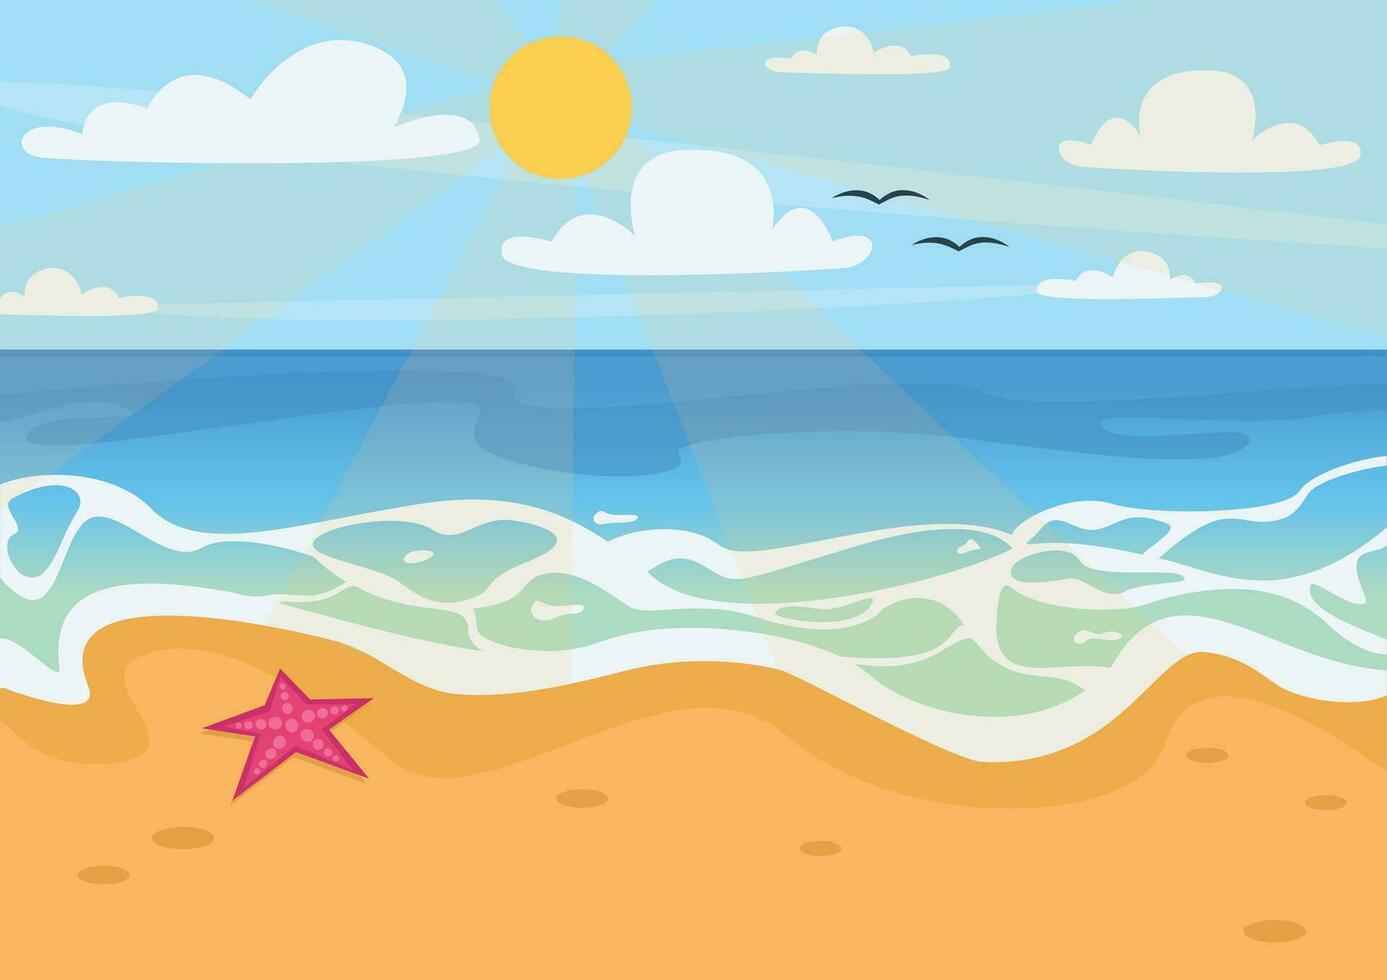 Summer landscape. Beautiful background. Ocean or sea, sandy beach, sky, sun and clouds. Vector graphic.